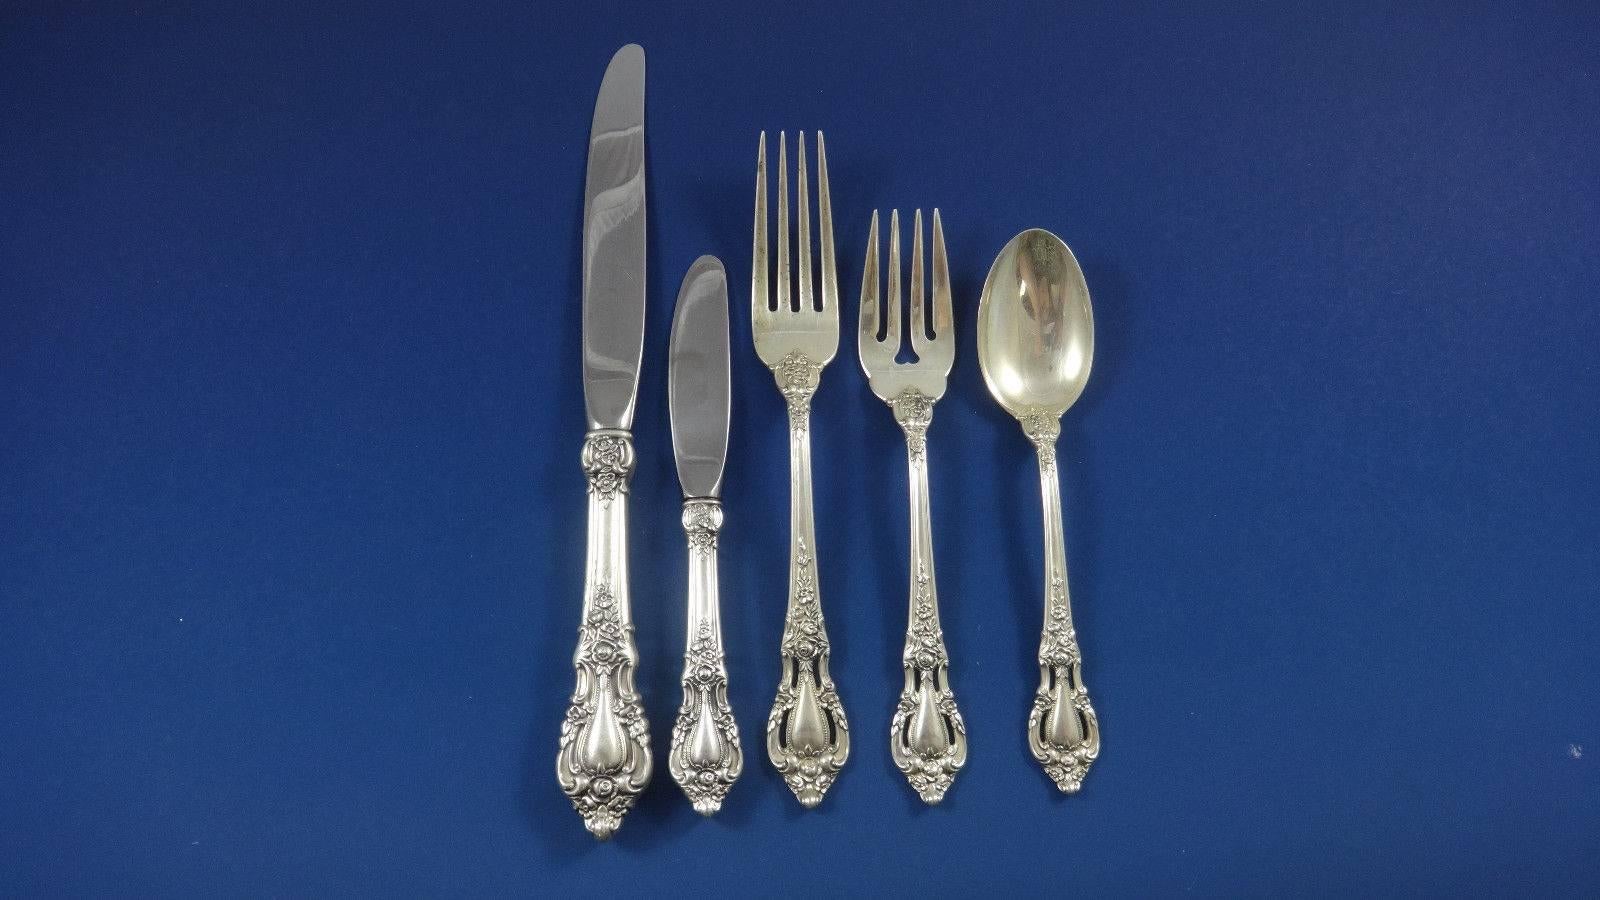 Aptly named, the Lunt Eloquence silverware collection speaks volumes of taste and tradition. First introduced in 1952, the pattern features ornate handle detailing, delicate cutouts, and coordinating flourishes at the neck. The working ends are